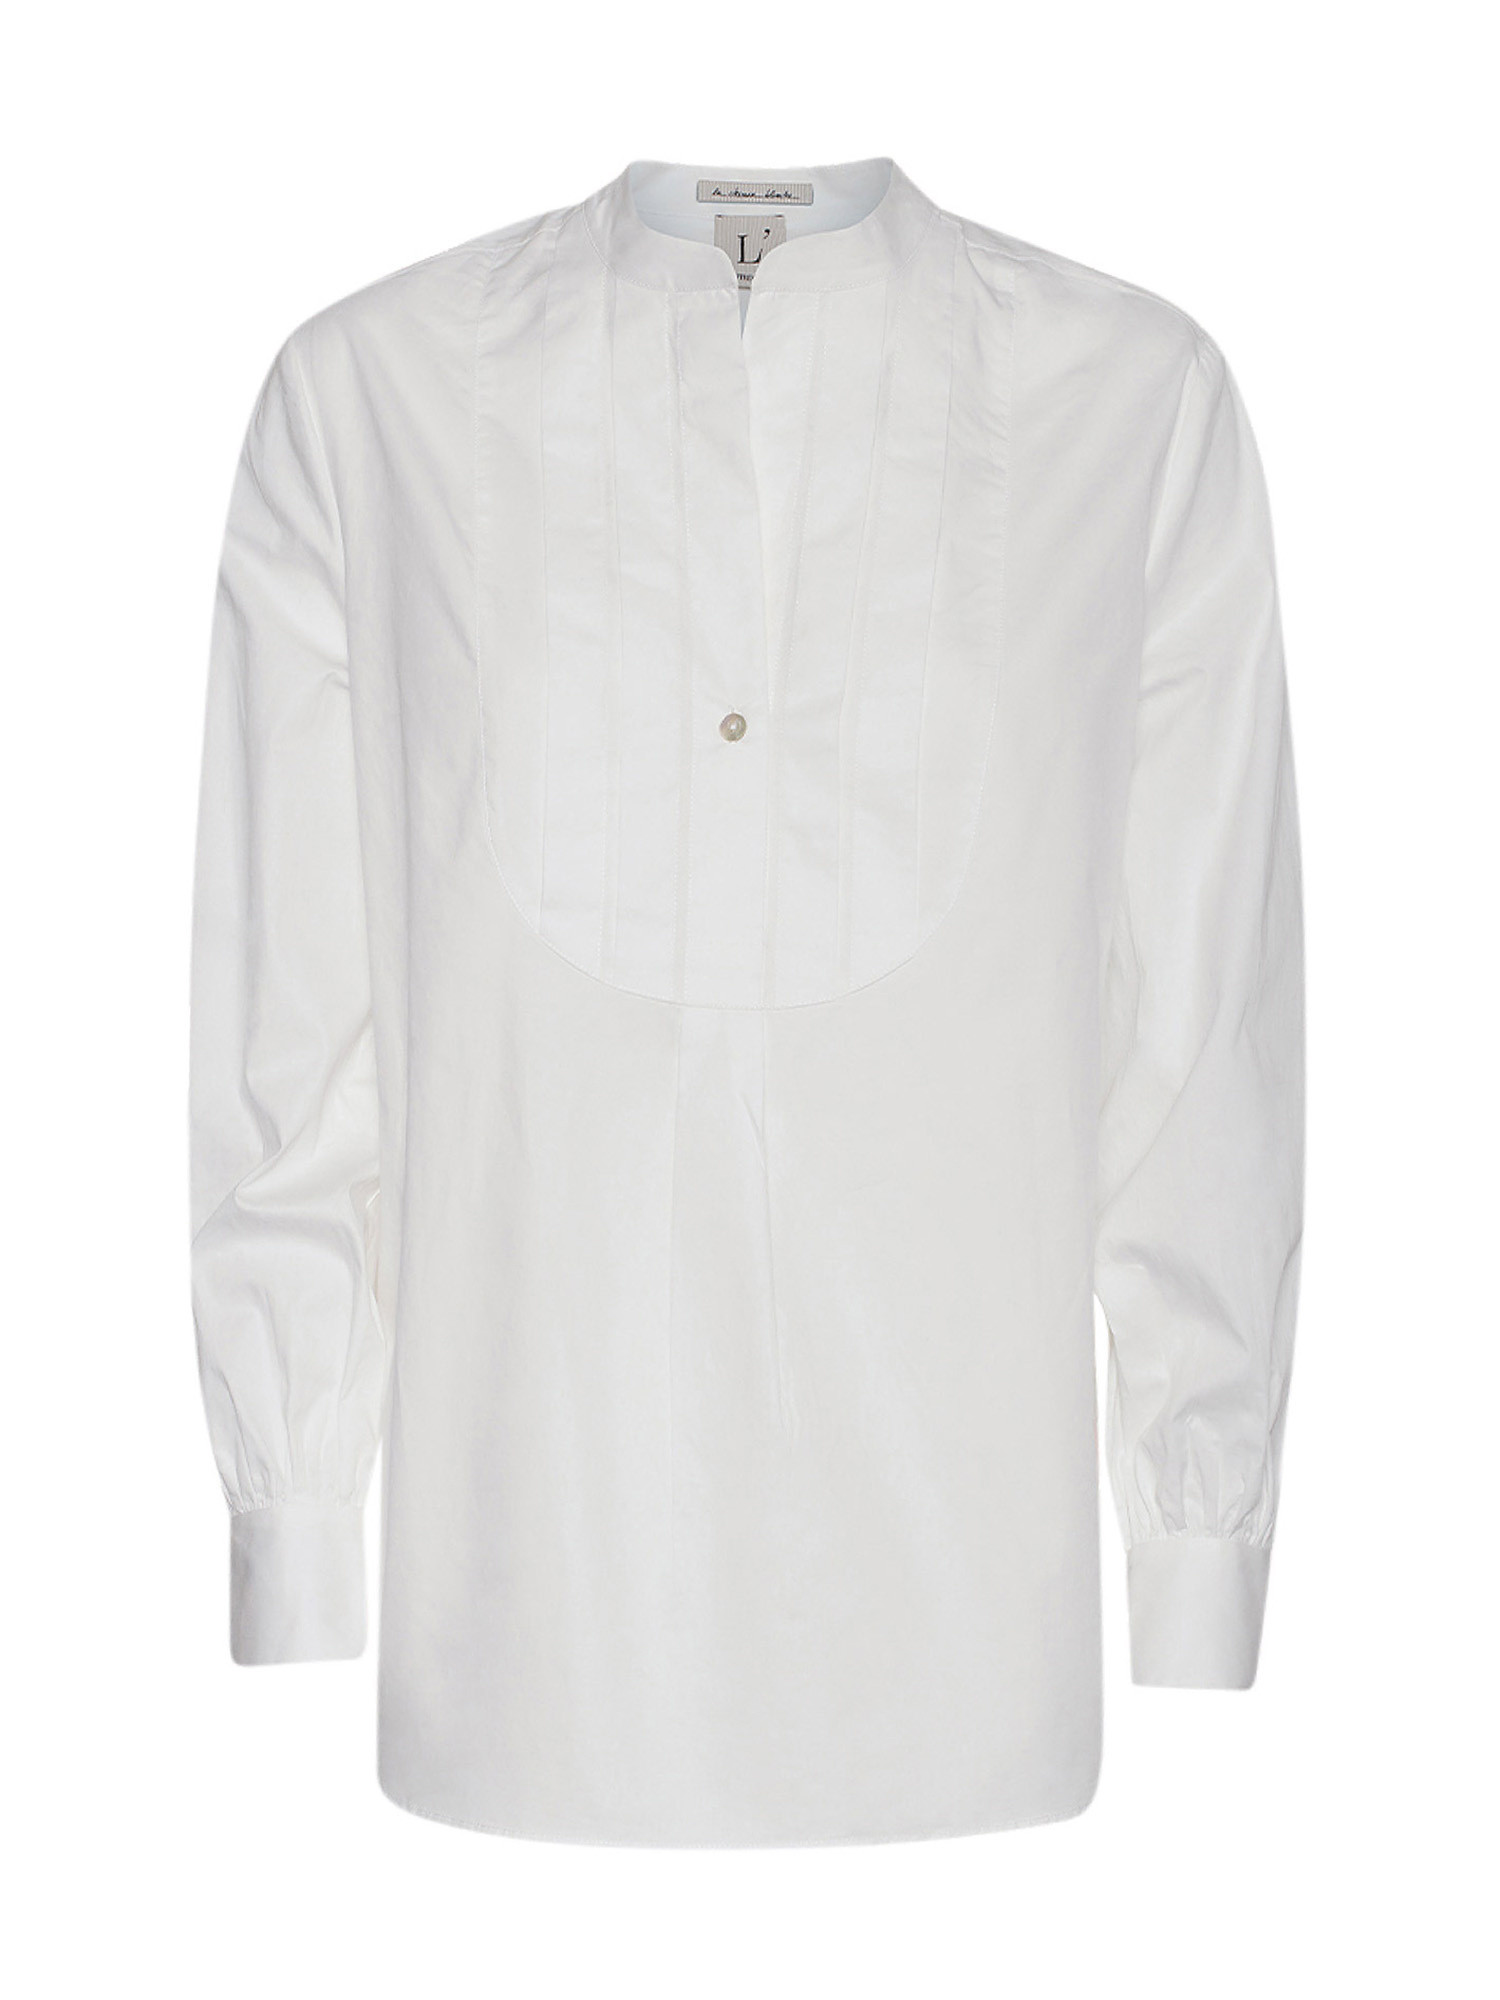 Camicia donna, Bianco, large image number 0